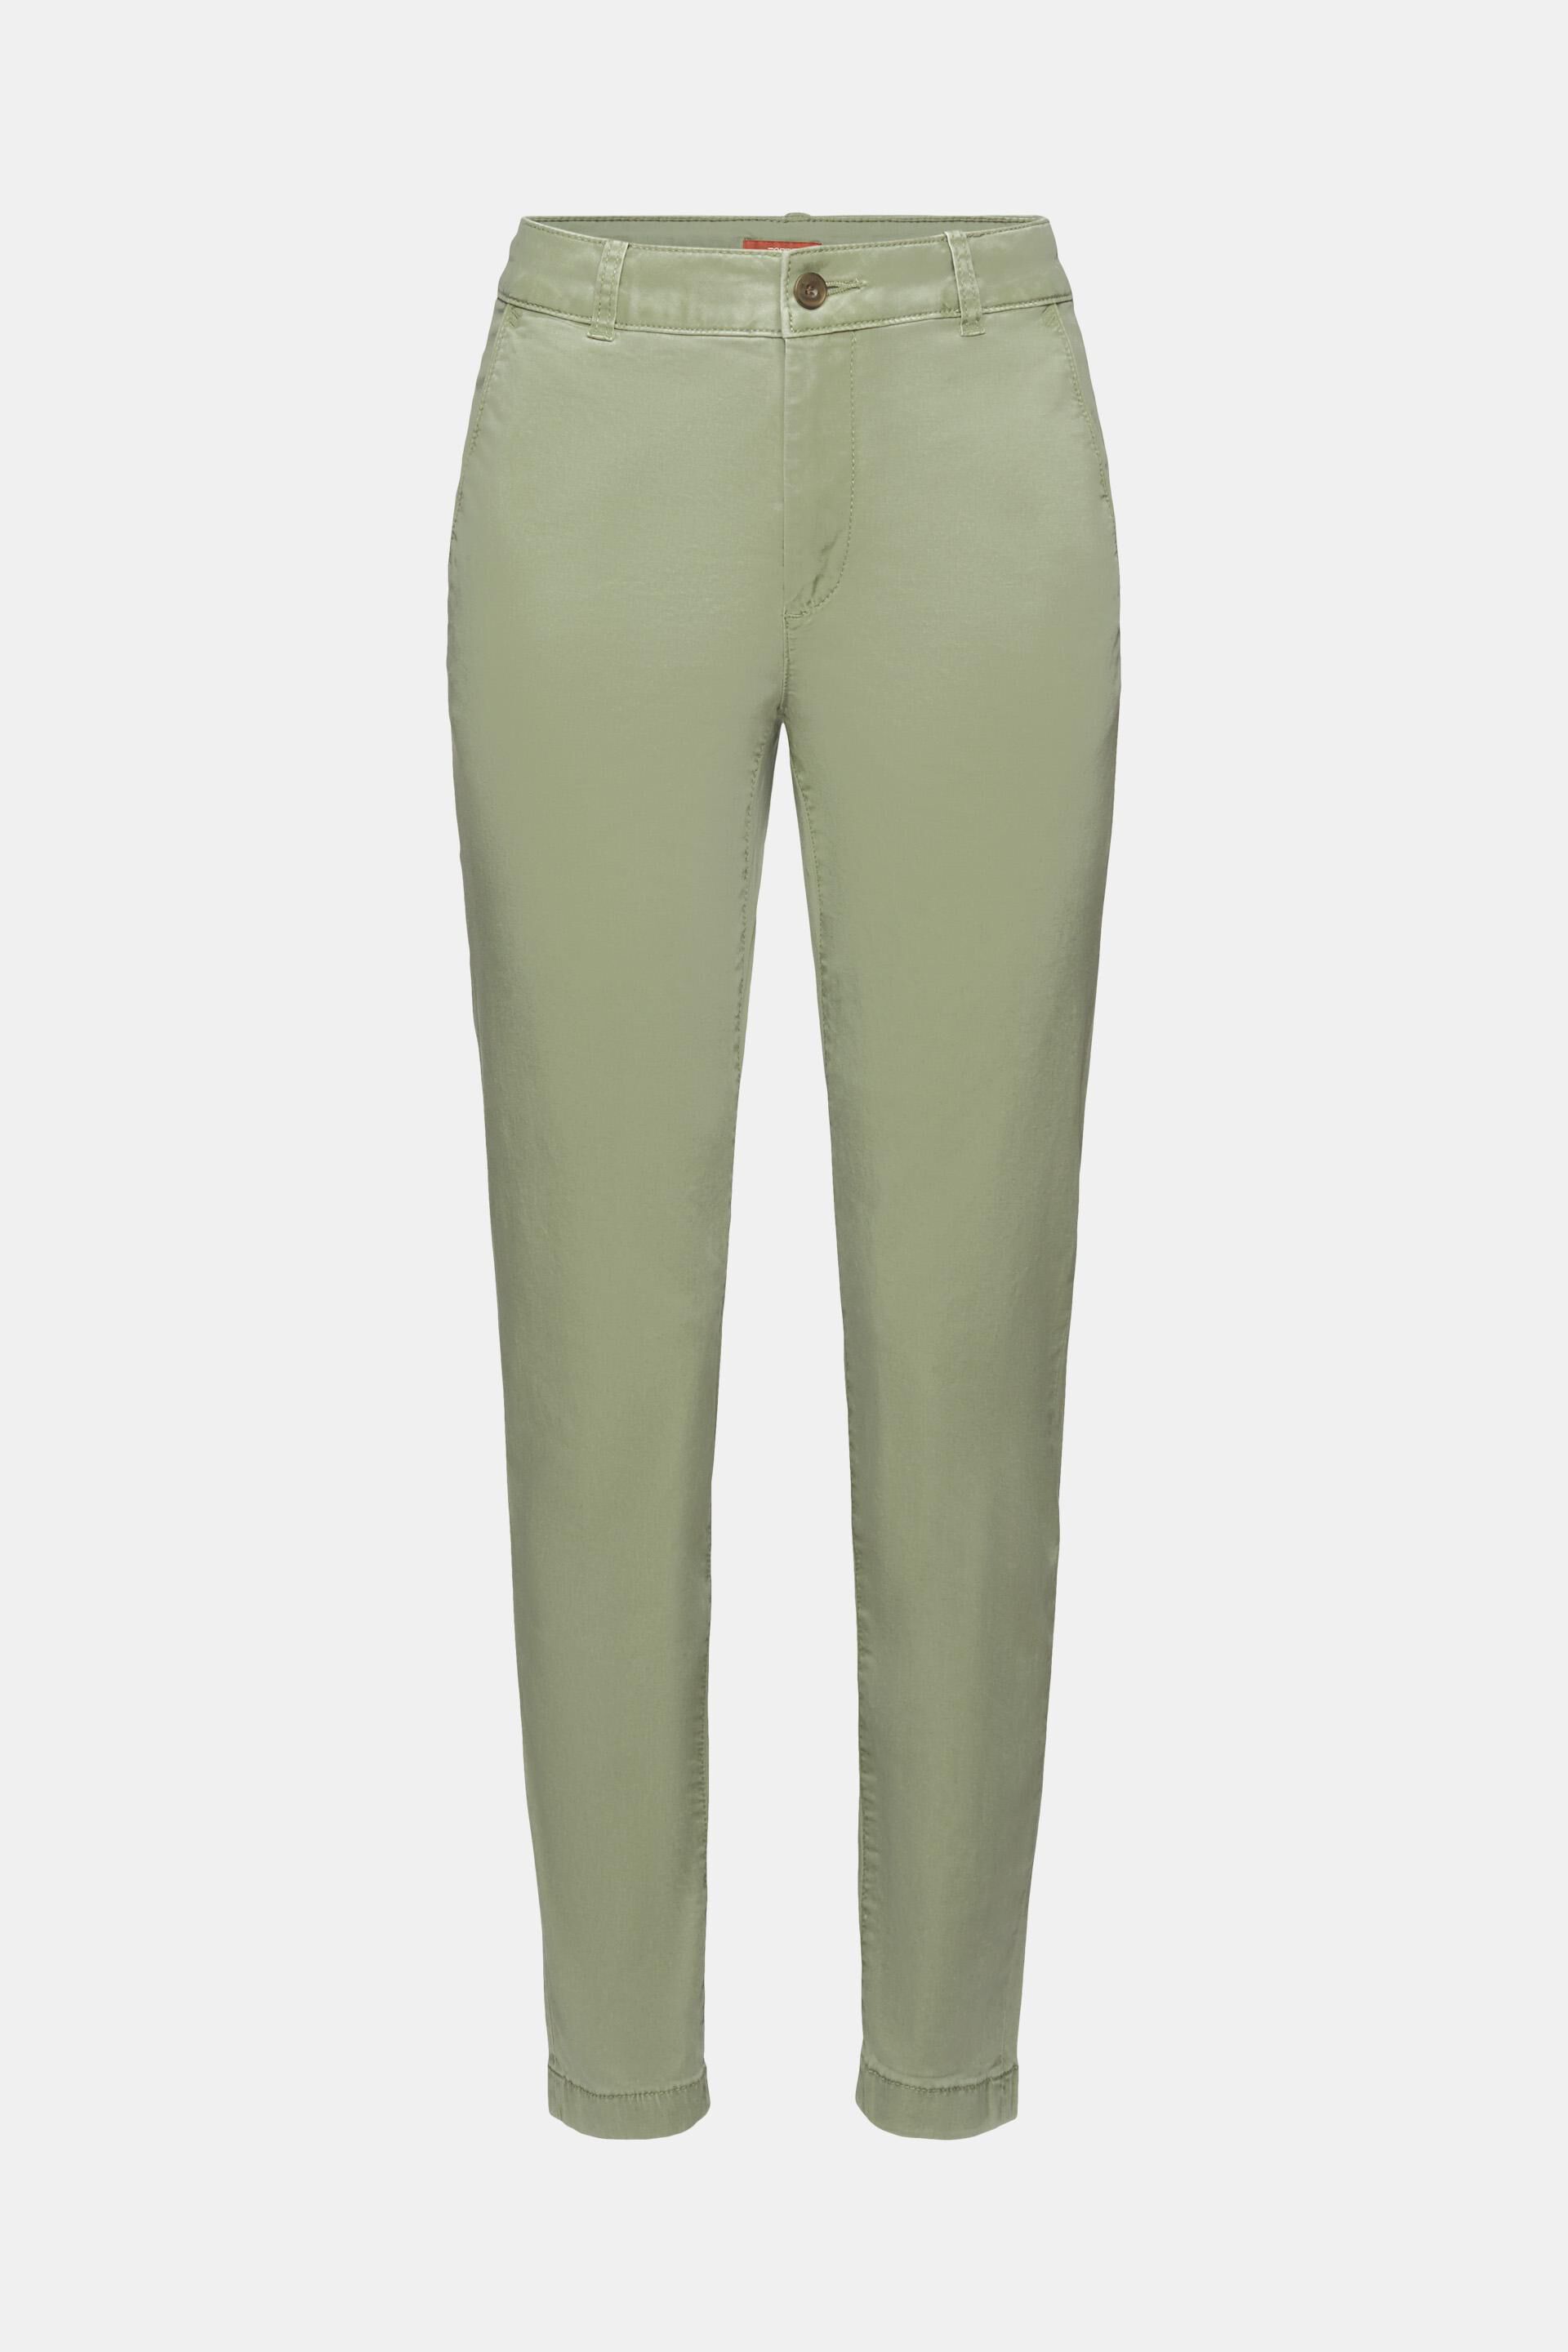 Ladies Green Trousers | Green Trousers for Women | hush